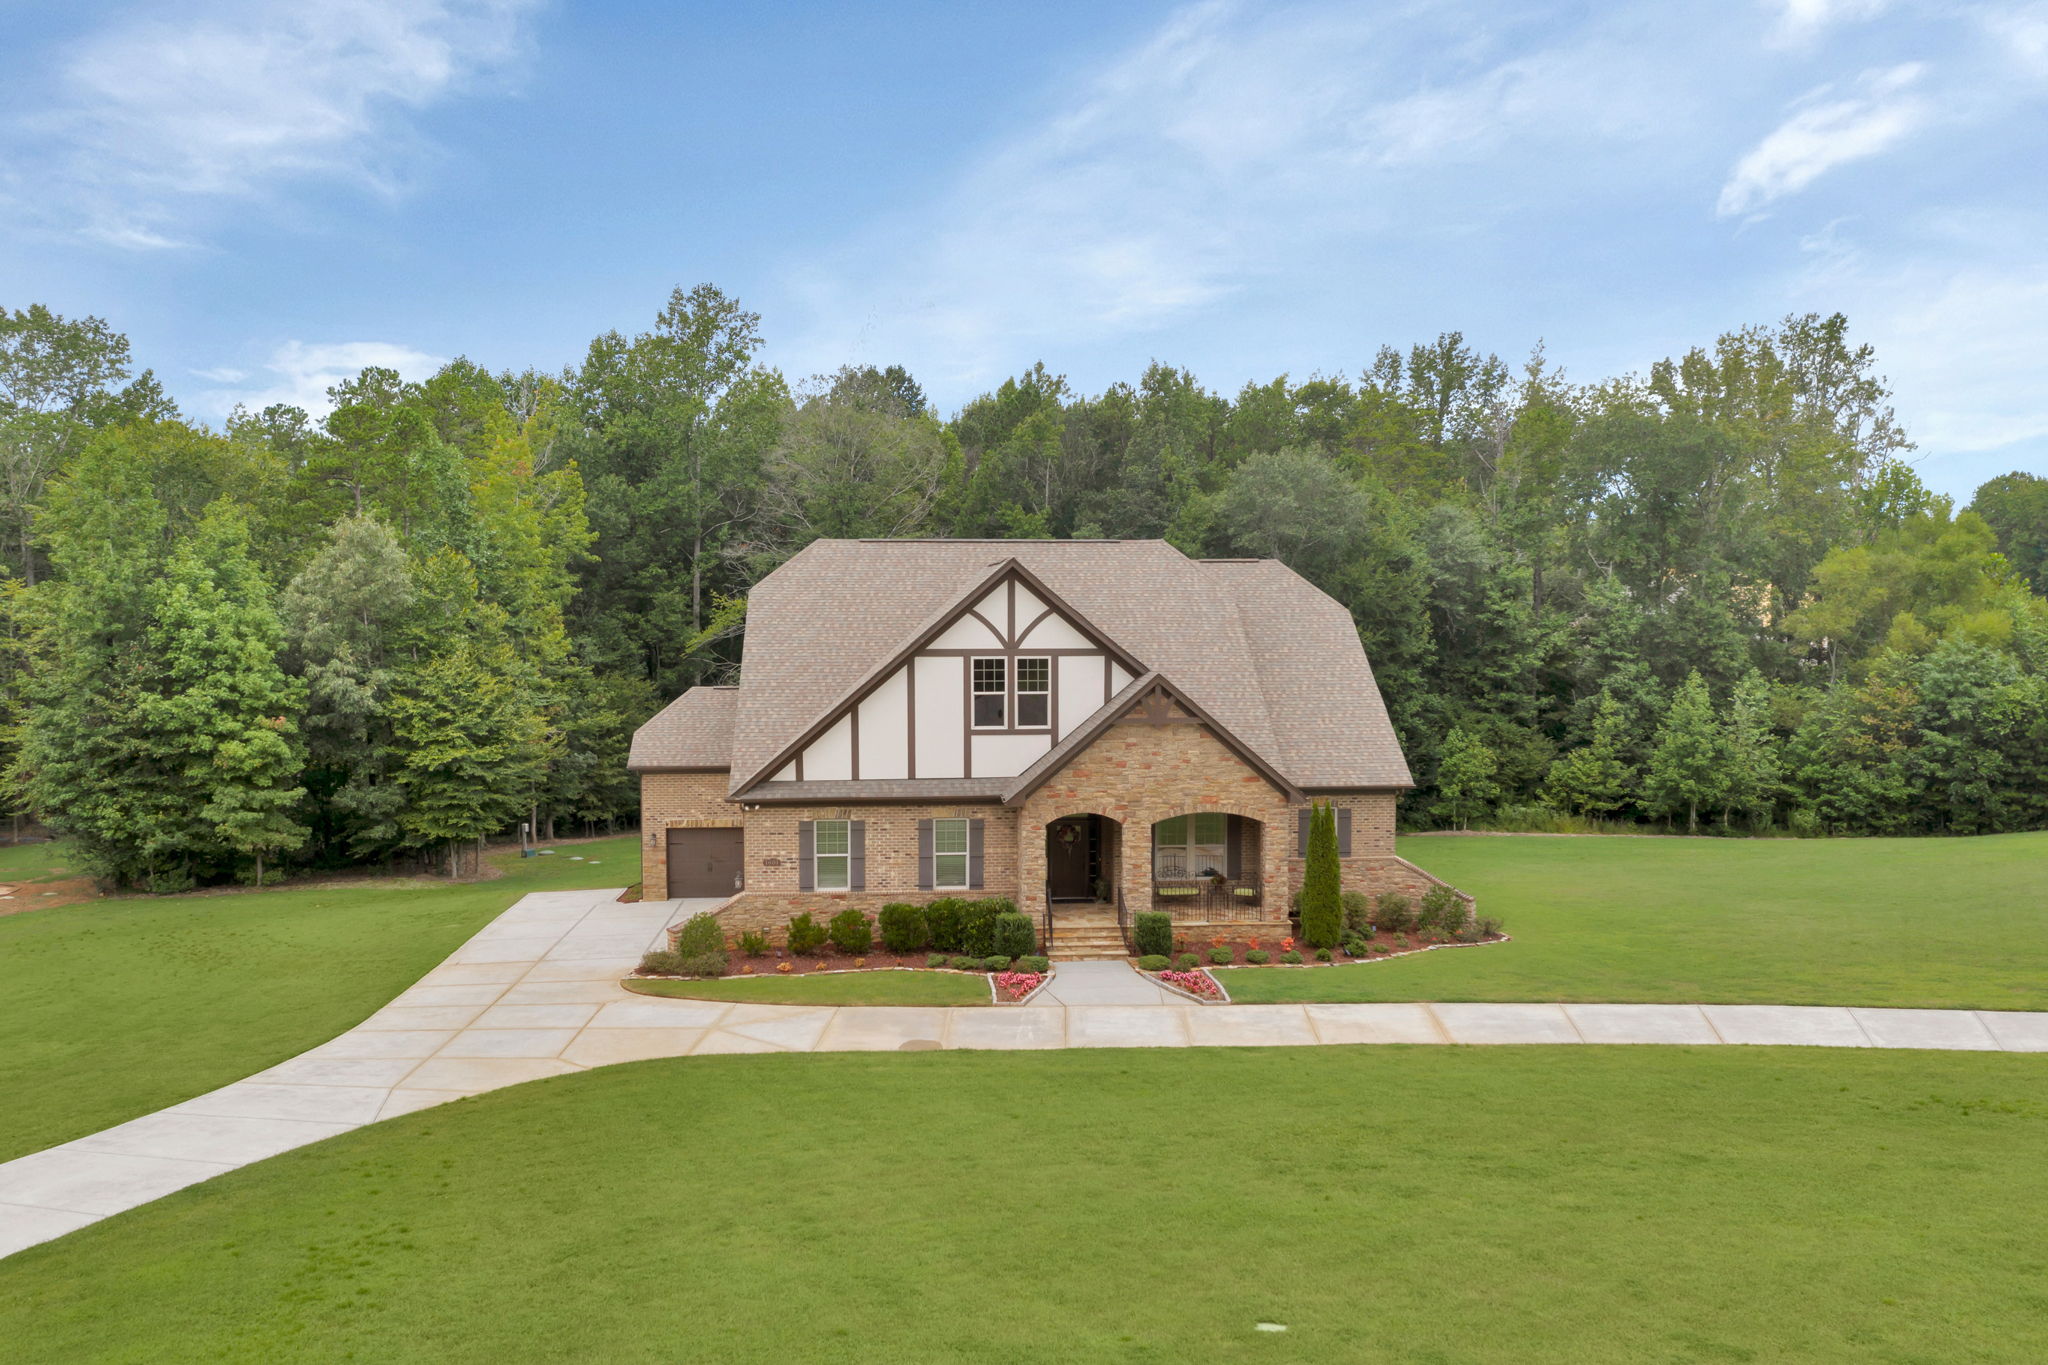  1601 Buckland Court, Indian Land, SC 29707, US